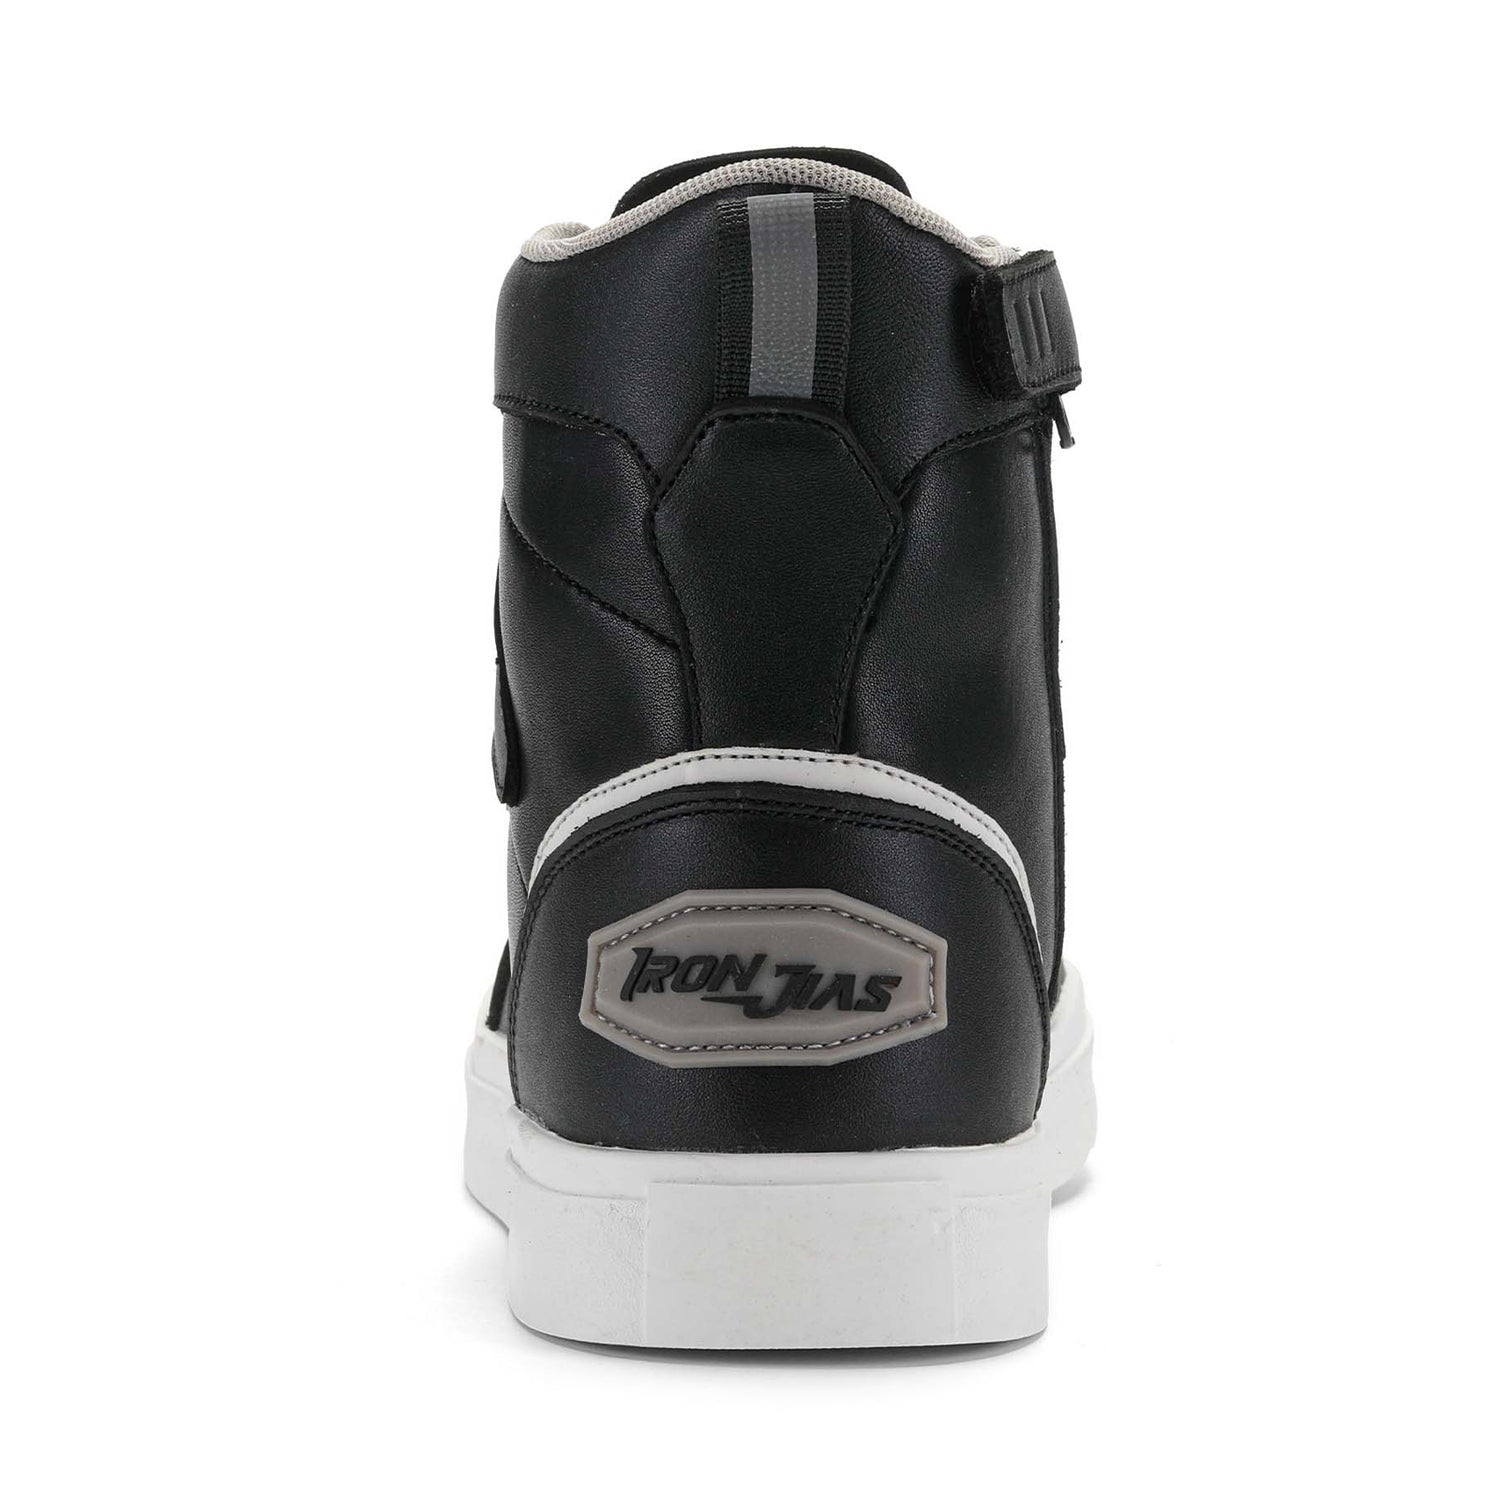 Casual Waterproof Motorcycle Riding Boots